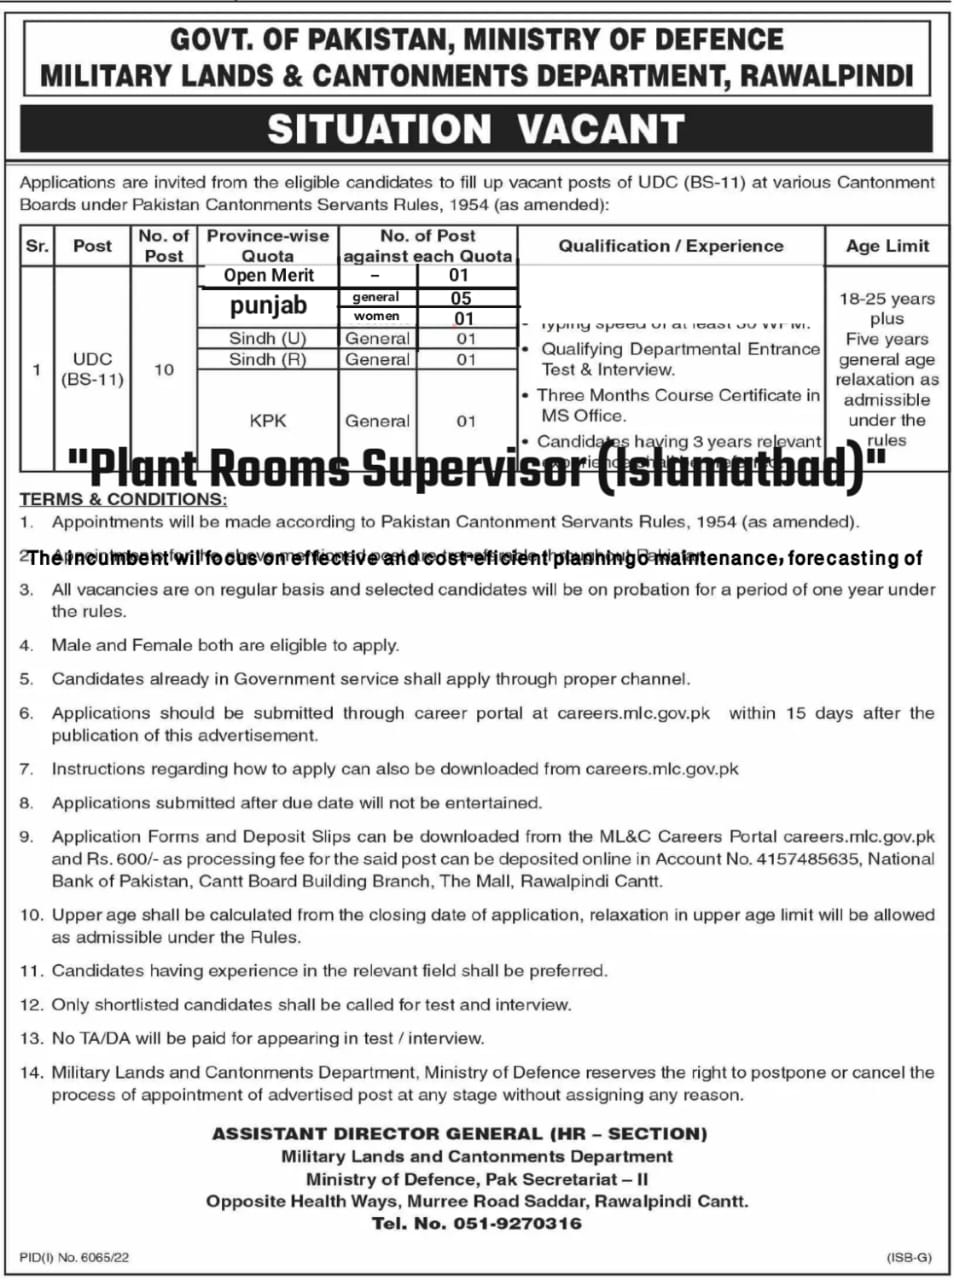 Military Lands and Cantonments Department ML & C Jobs April 2023
